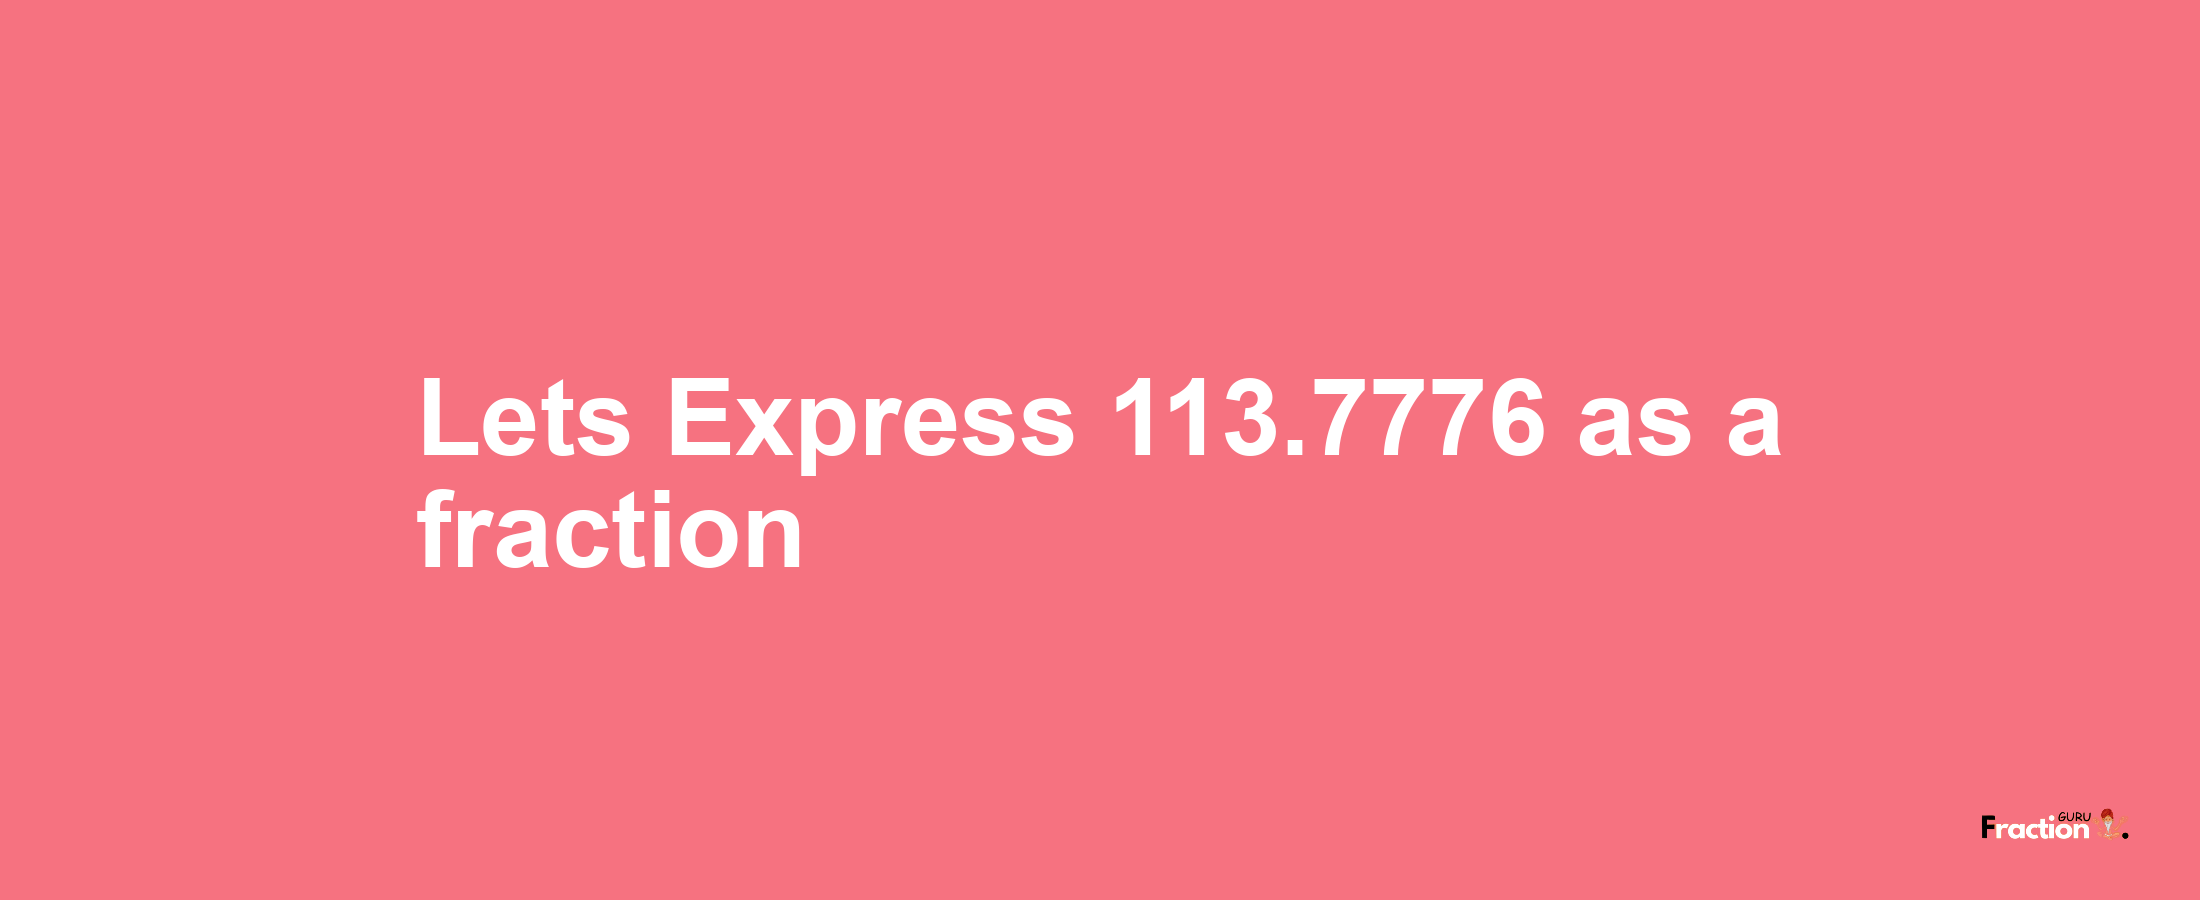 Lets Express 113.7776 as afraction